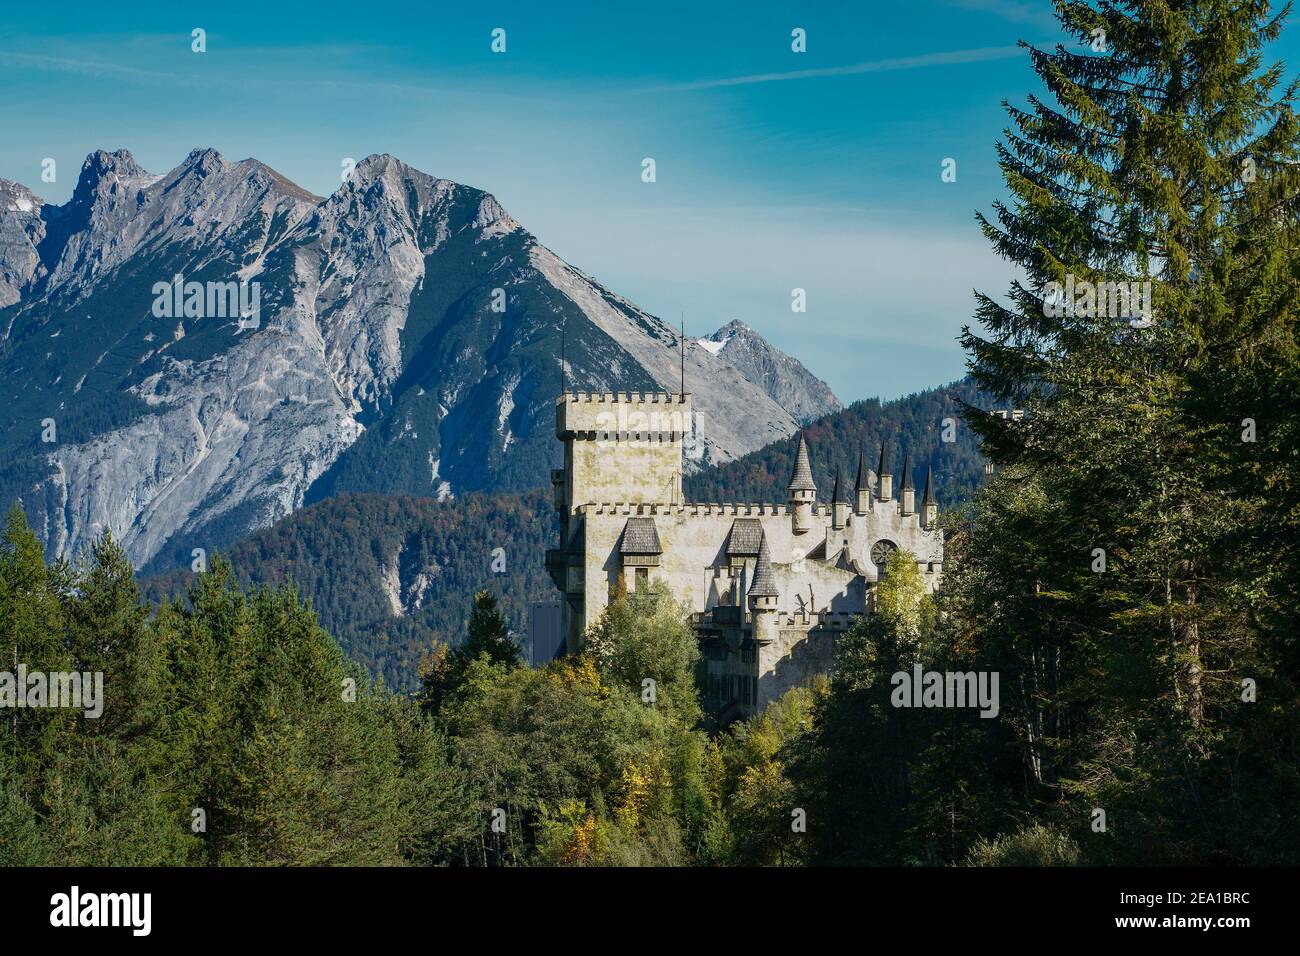 Seefeld, Austria- october 11, 2019: View the tyrolian alps panorama with magic castle Seefeld in Austria on a bright sunny day Stock Photo